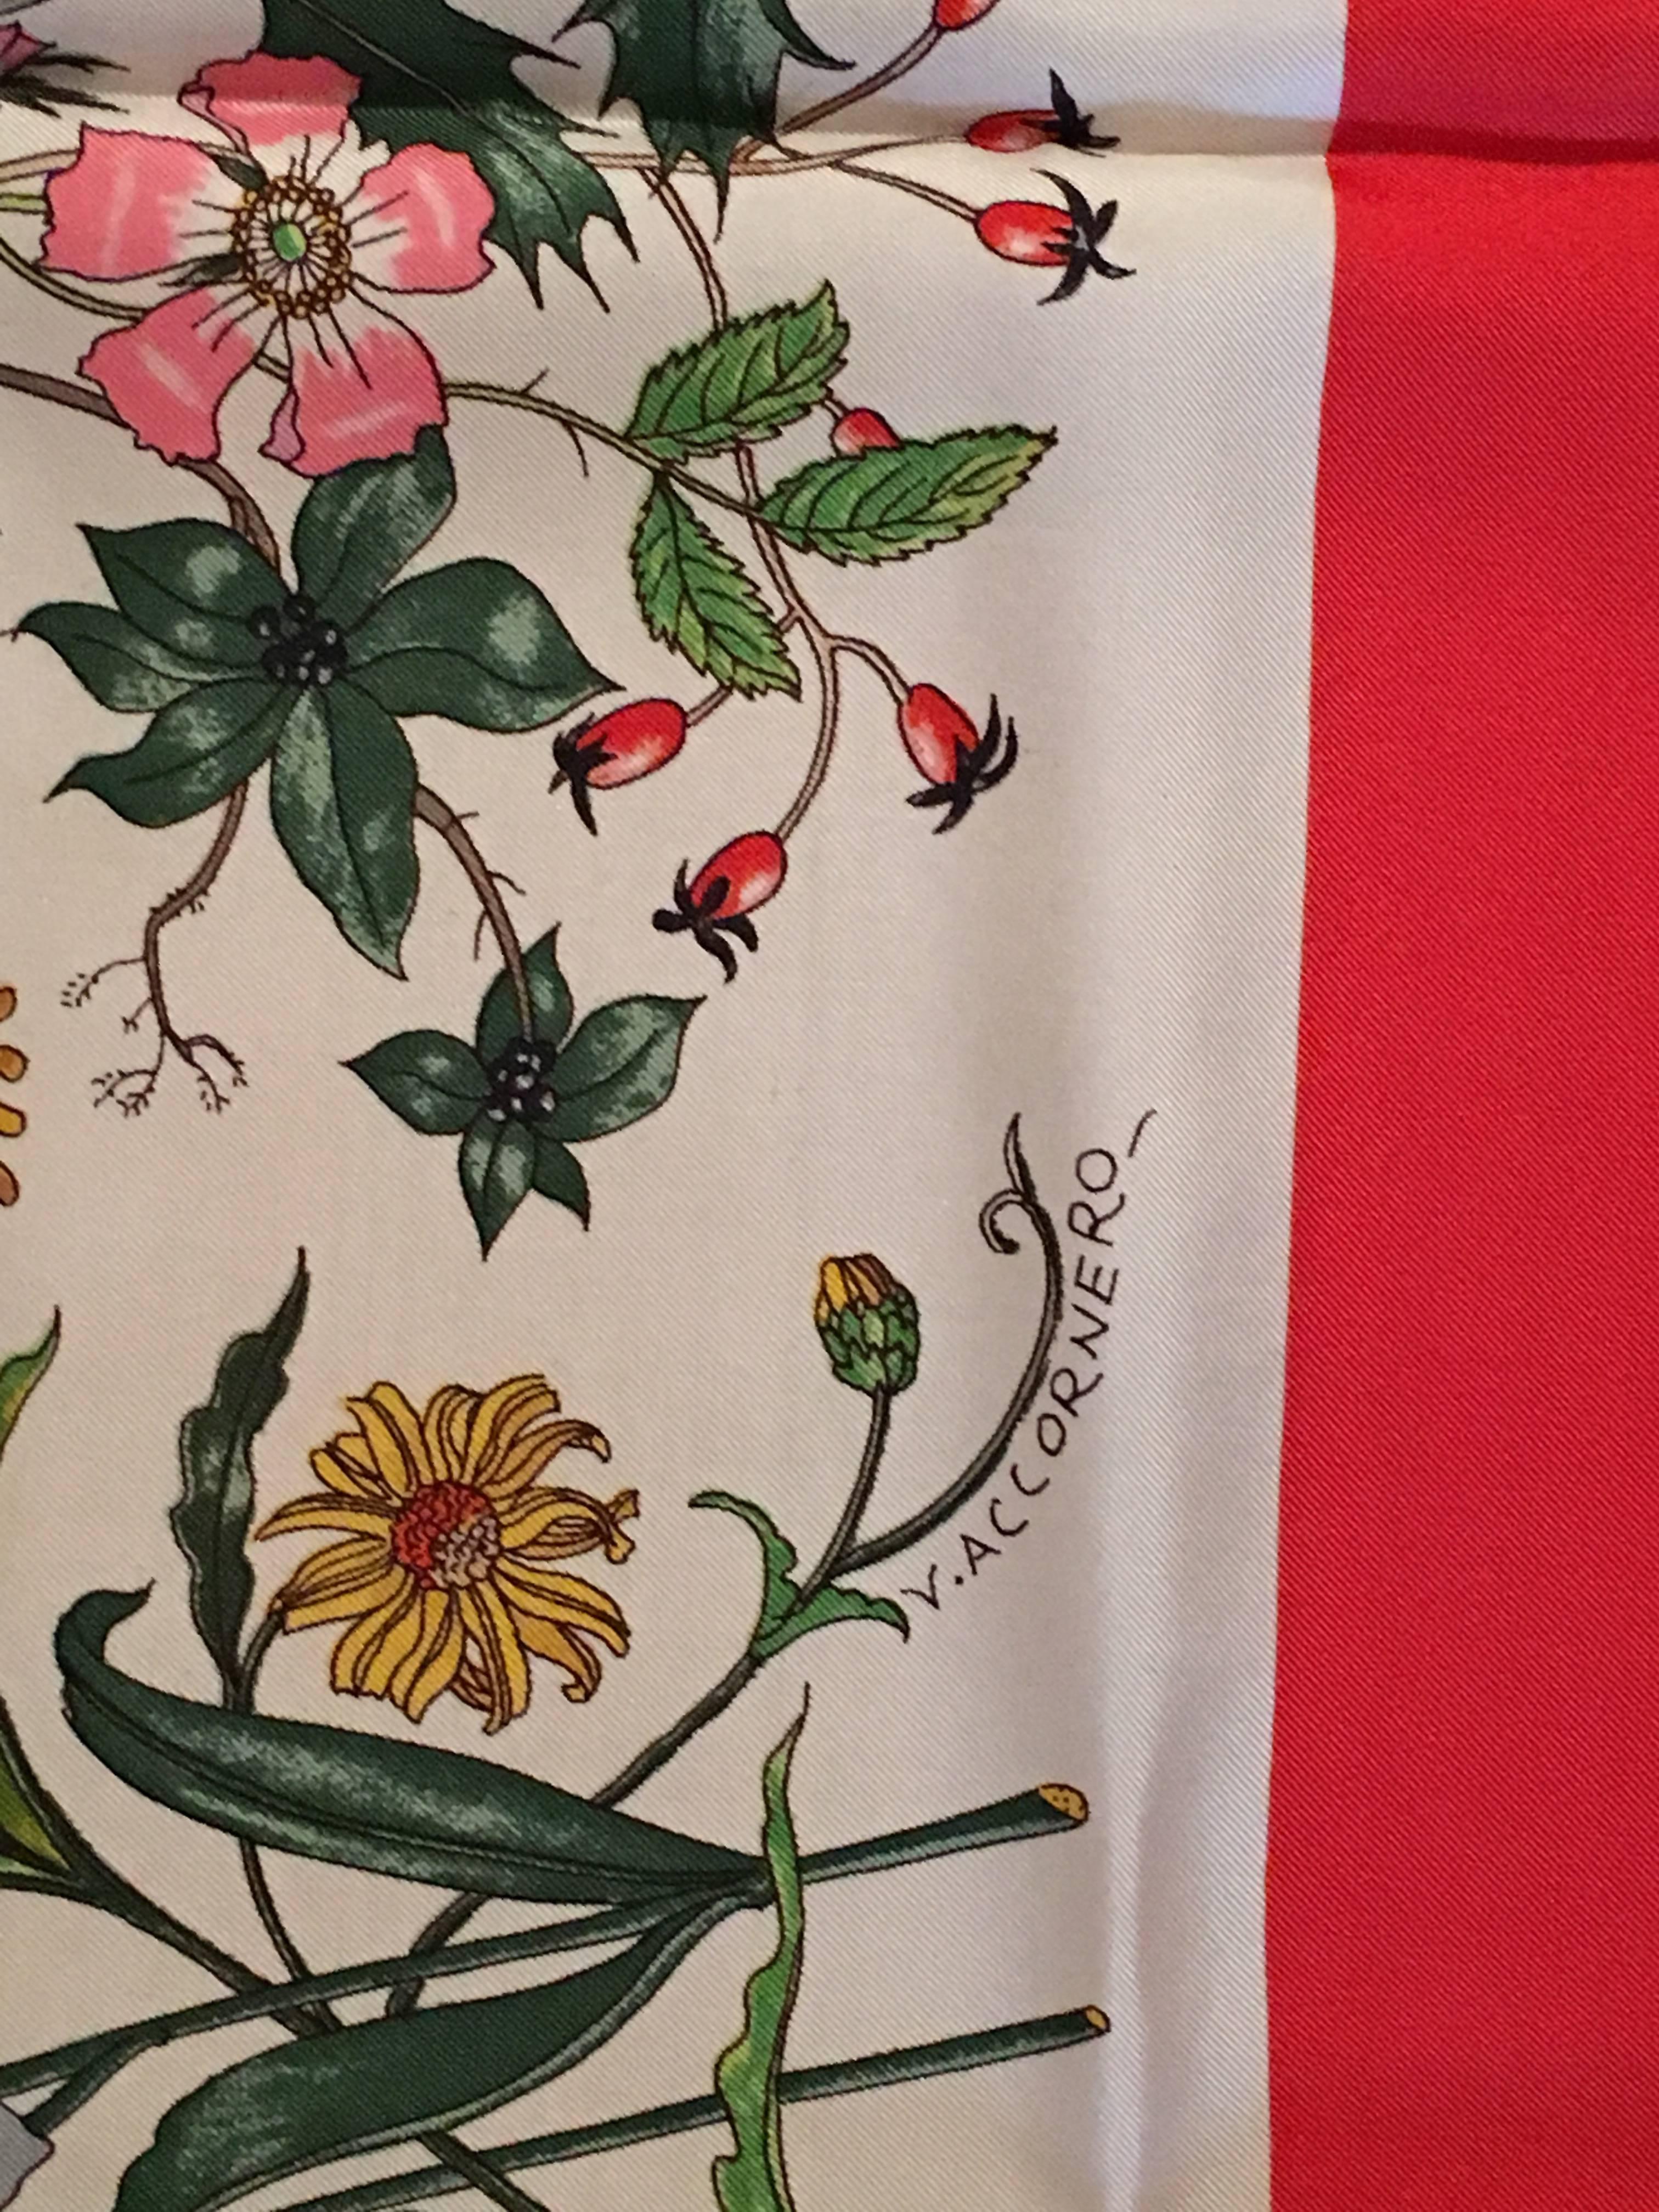 This 1980s signature floral print silk scarf from Gucci features the iconic 'Flora' pattern with a red border - perfect for the Holiday season and comes in its original Gucci box. It measures 34